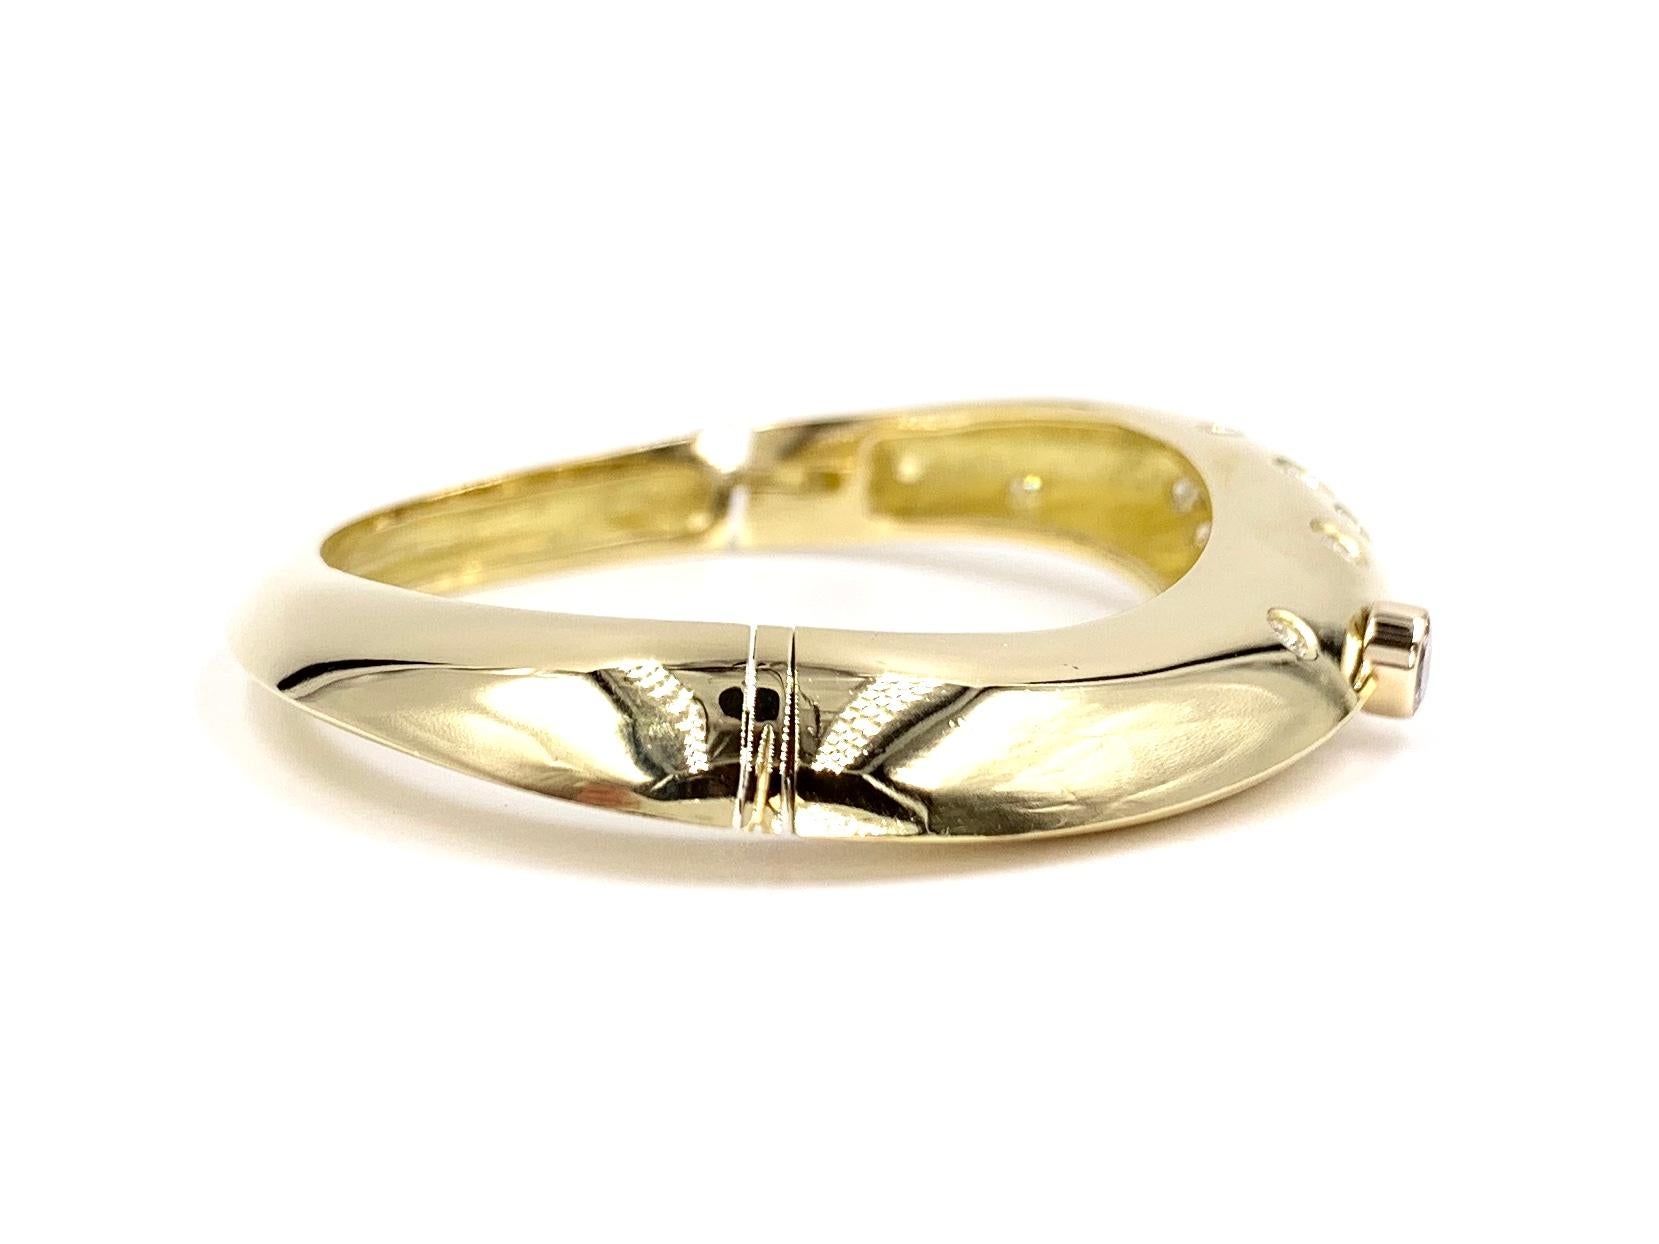 18 Karat Modern Curved Diamond Bangle Bracelet In Good Condition For Sale In Pikesville, MD